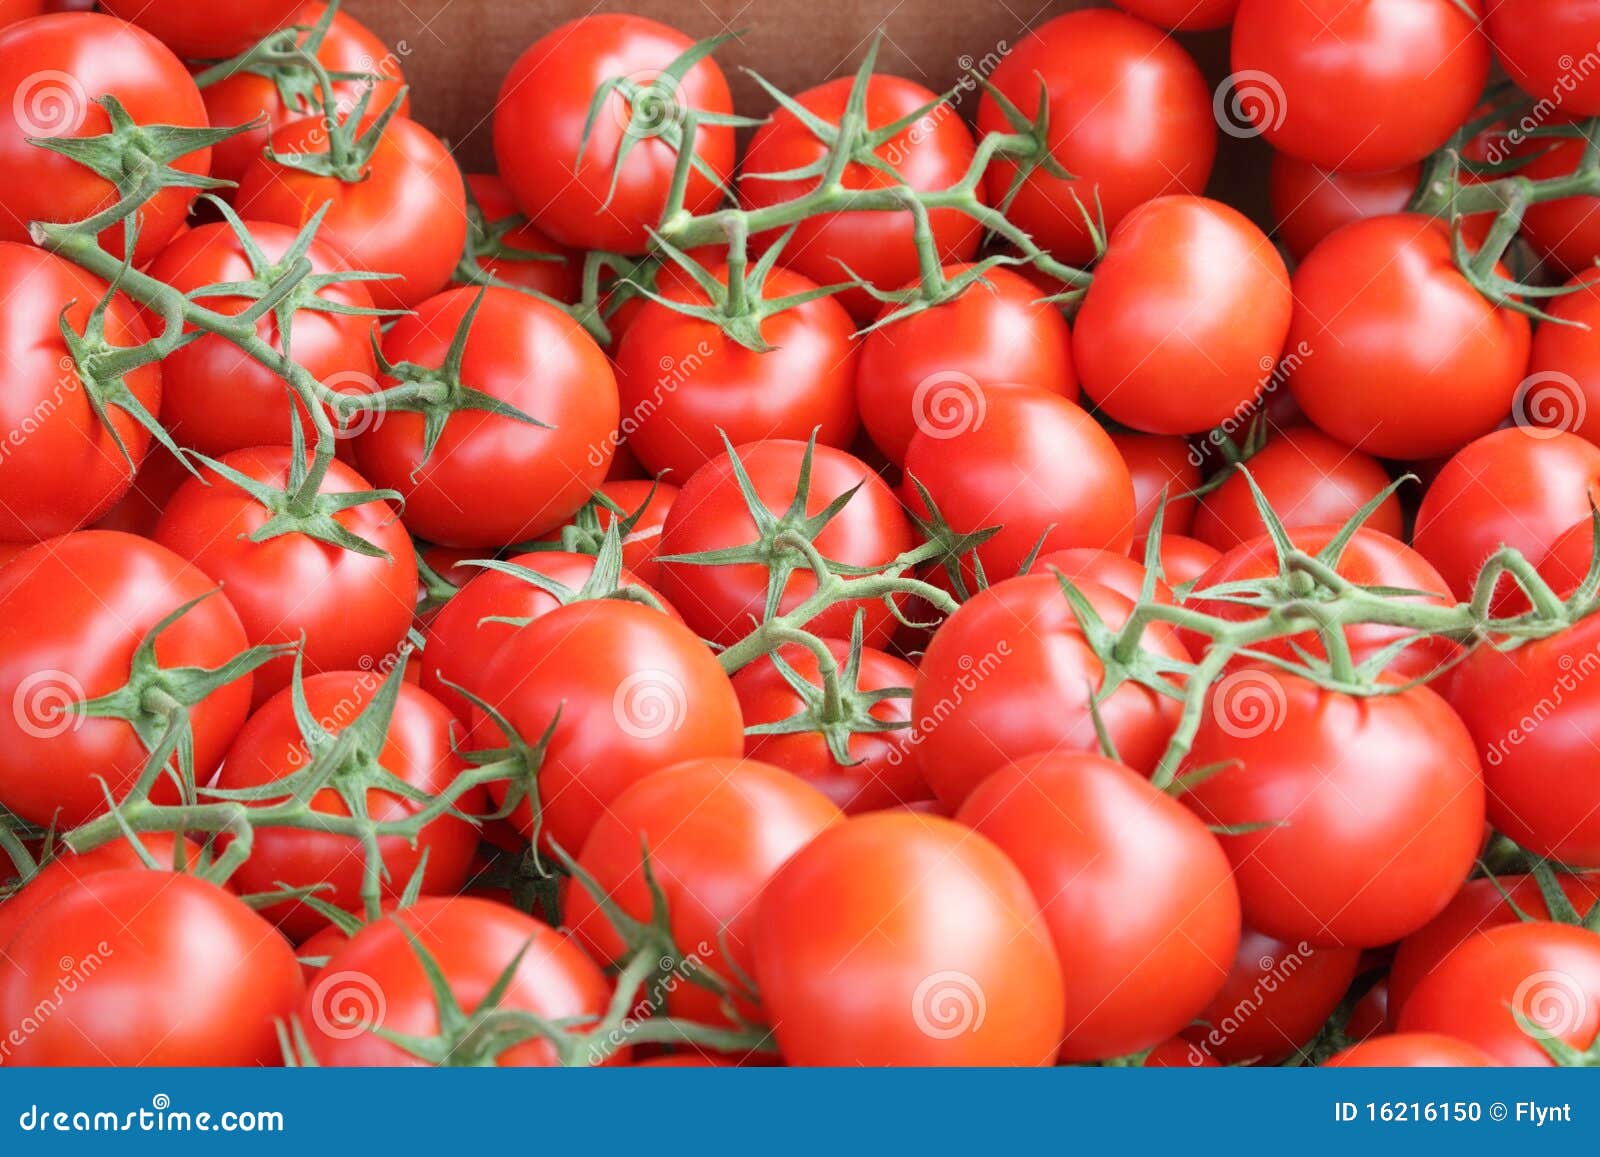 Tomato background stock photo. Image of healthy, clean - 16216150